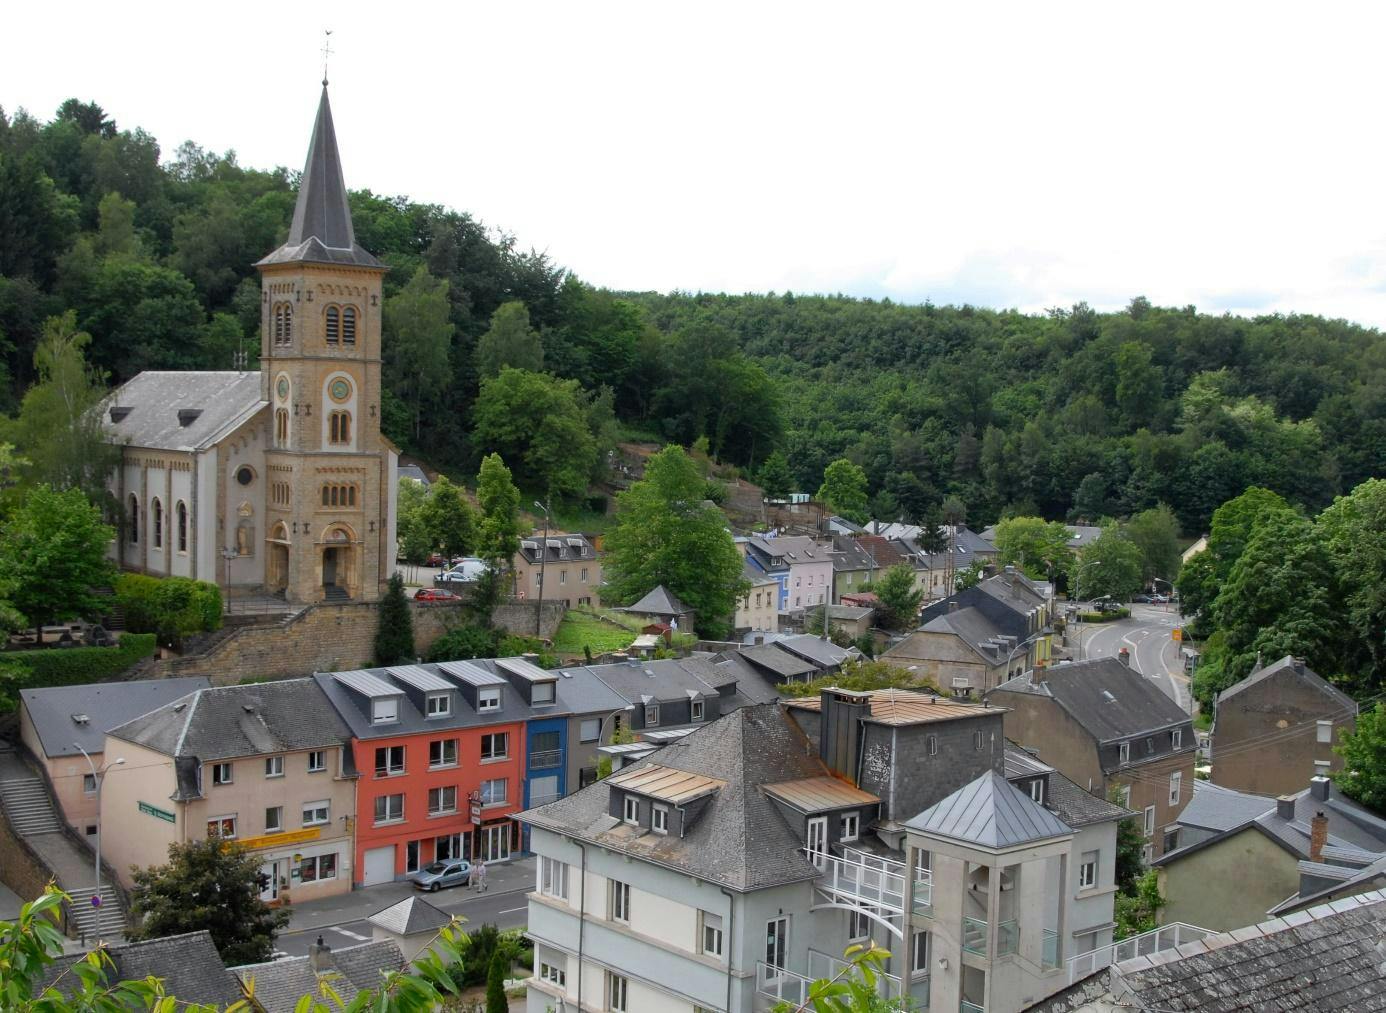 View of the Rollingergrund neighborhood from Rue des Dormans., source: Wikipedia